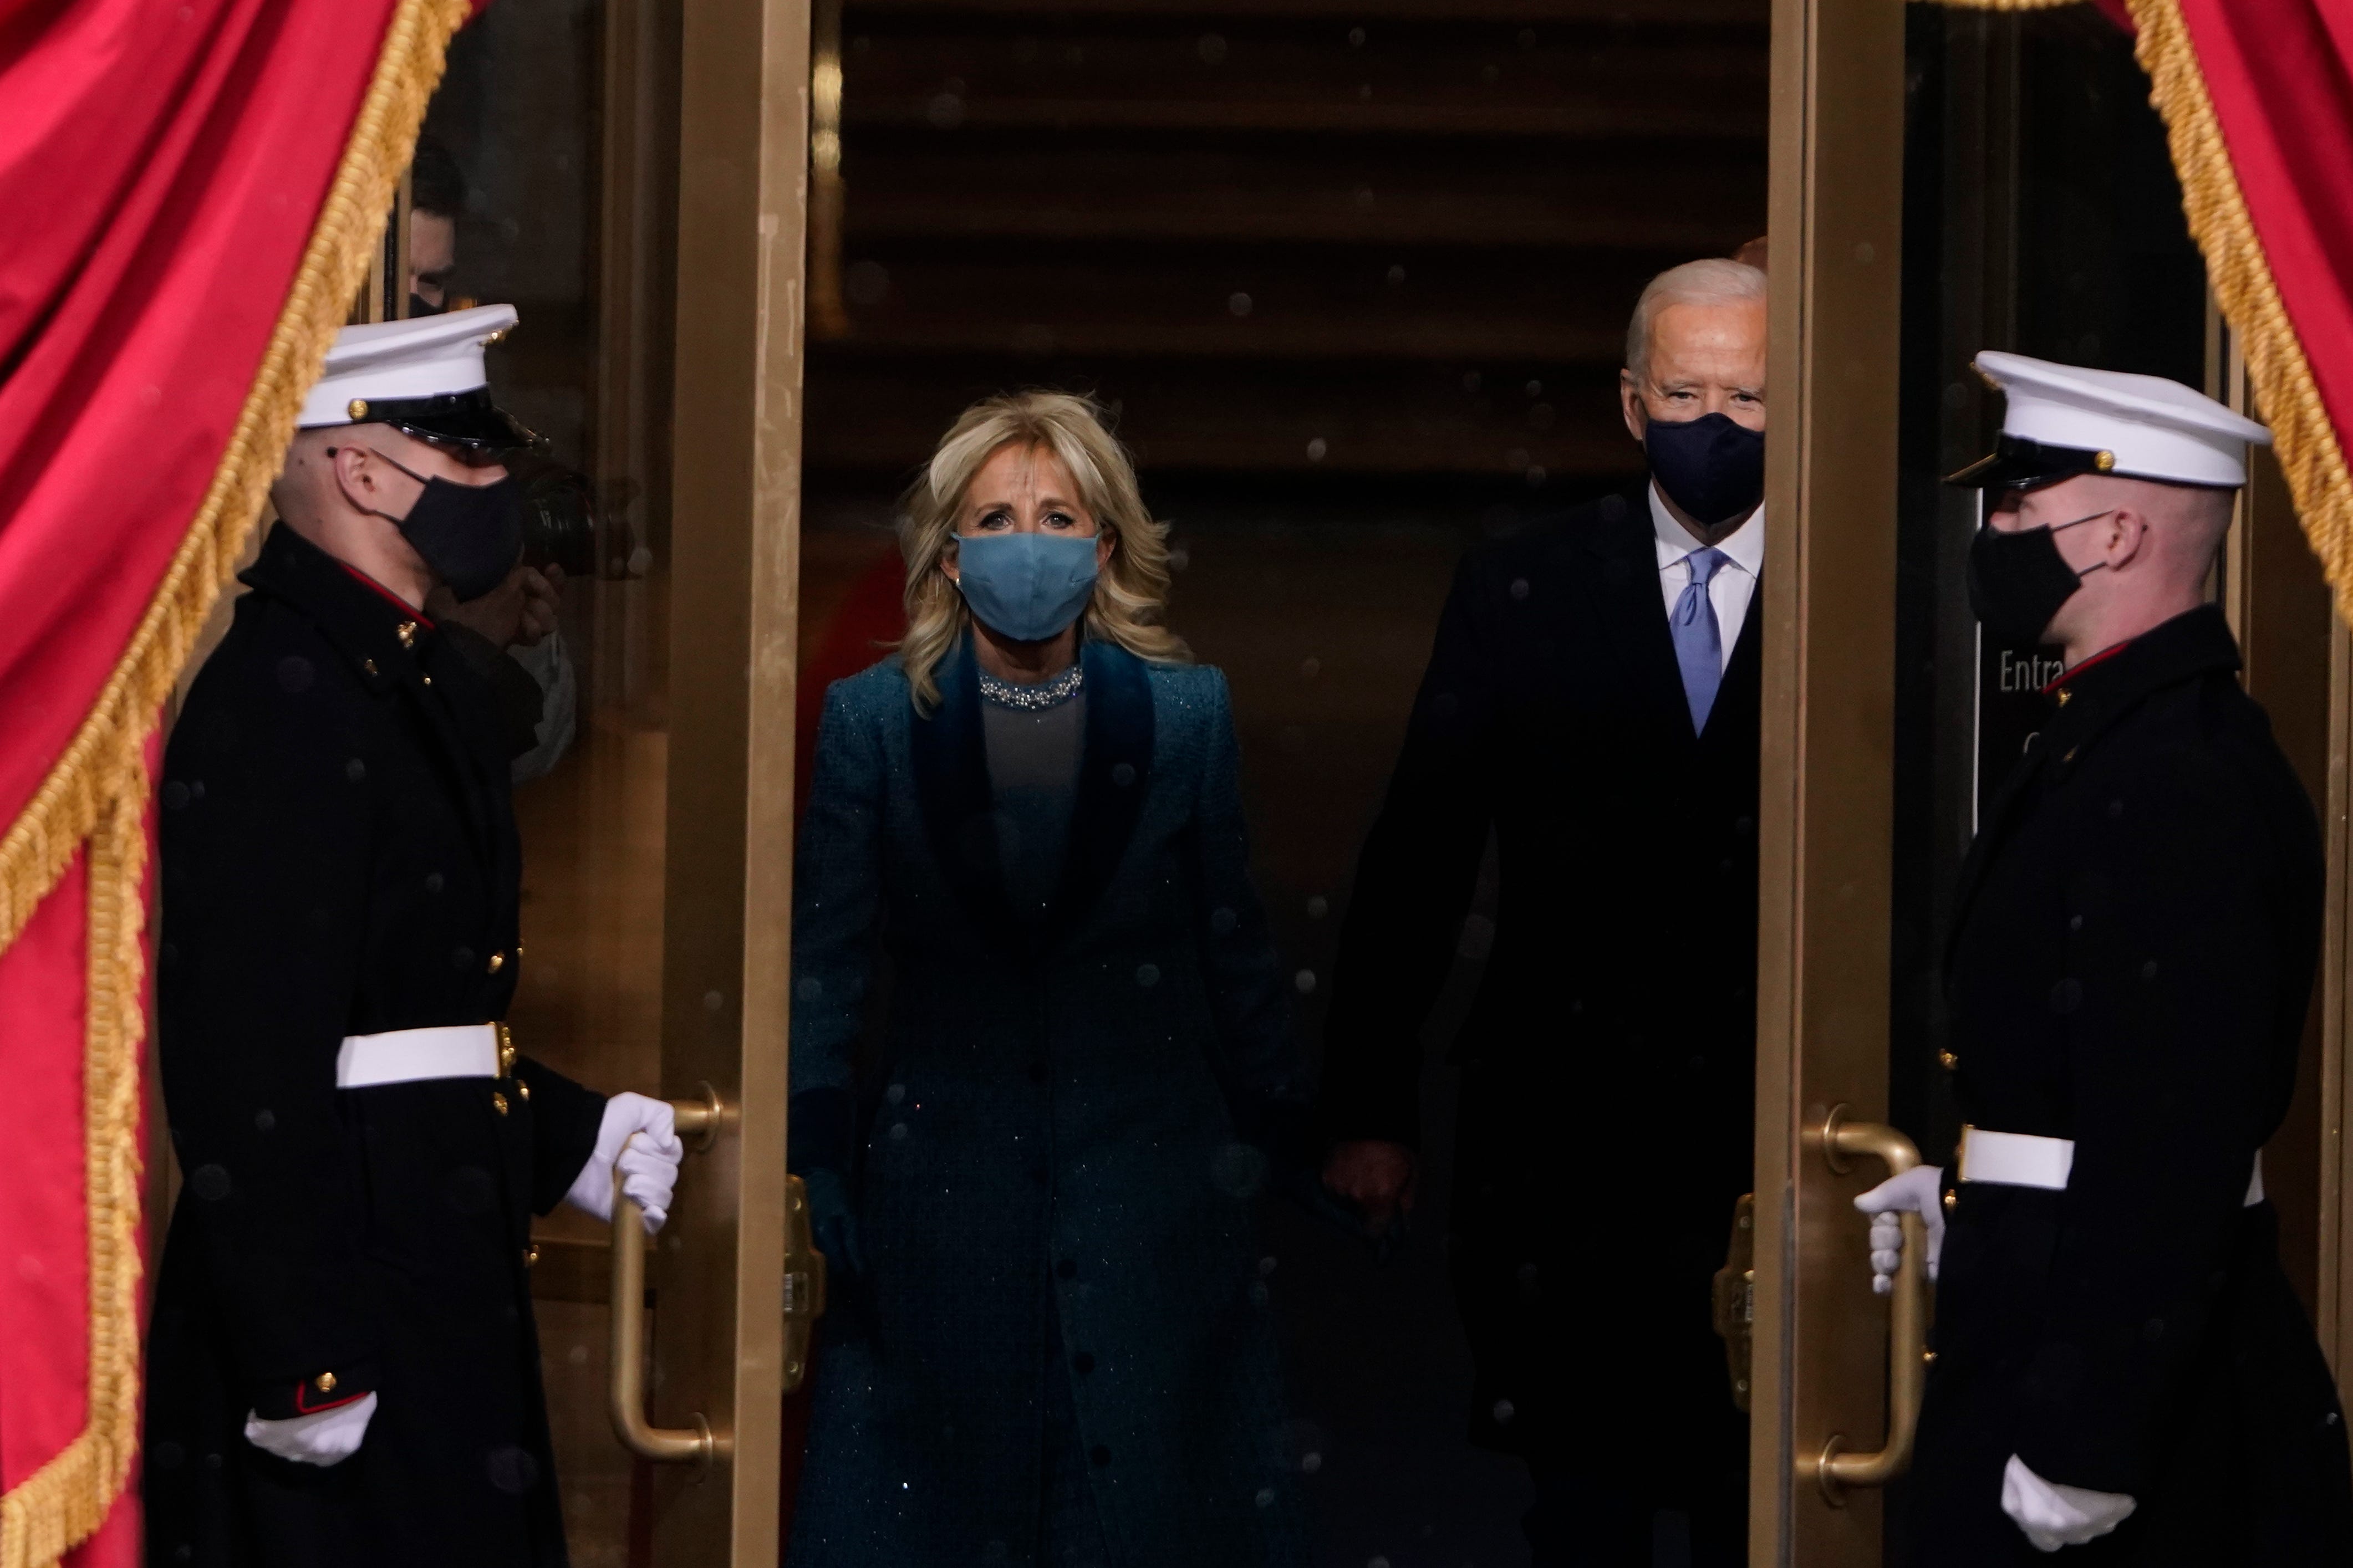 President-elect Joe Biden and his wife Jill, walk out for the 59th Presidential Inauguration at the U.S. Capitol in Washington, Wednesday, Jan. 20, 2021.